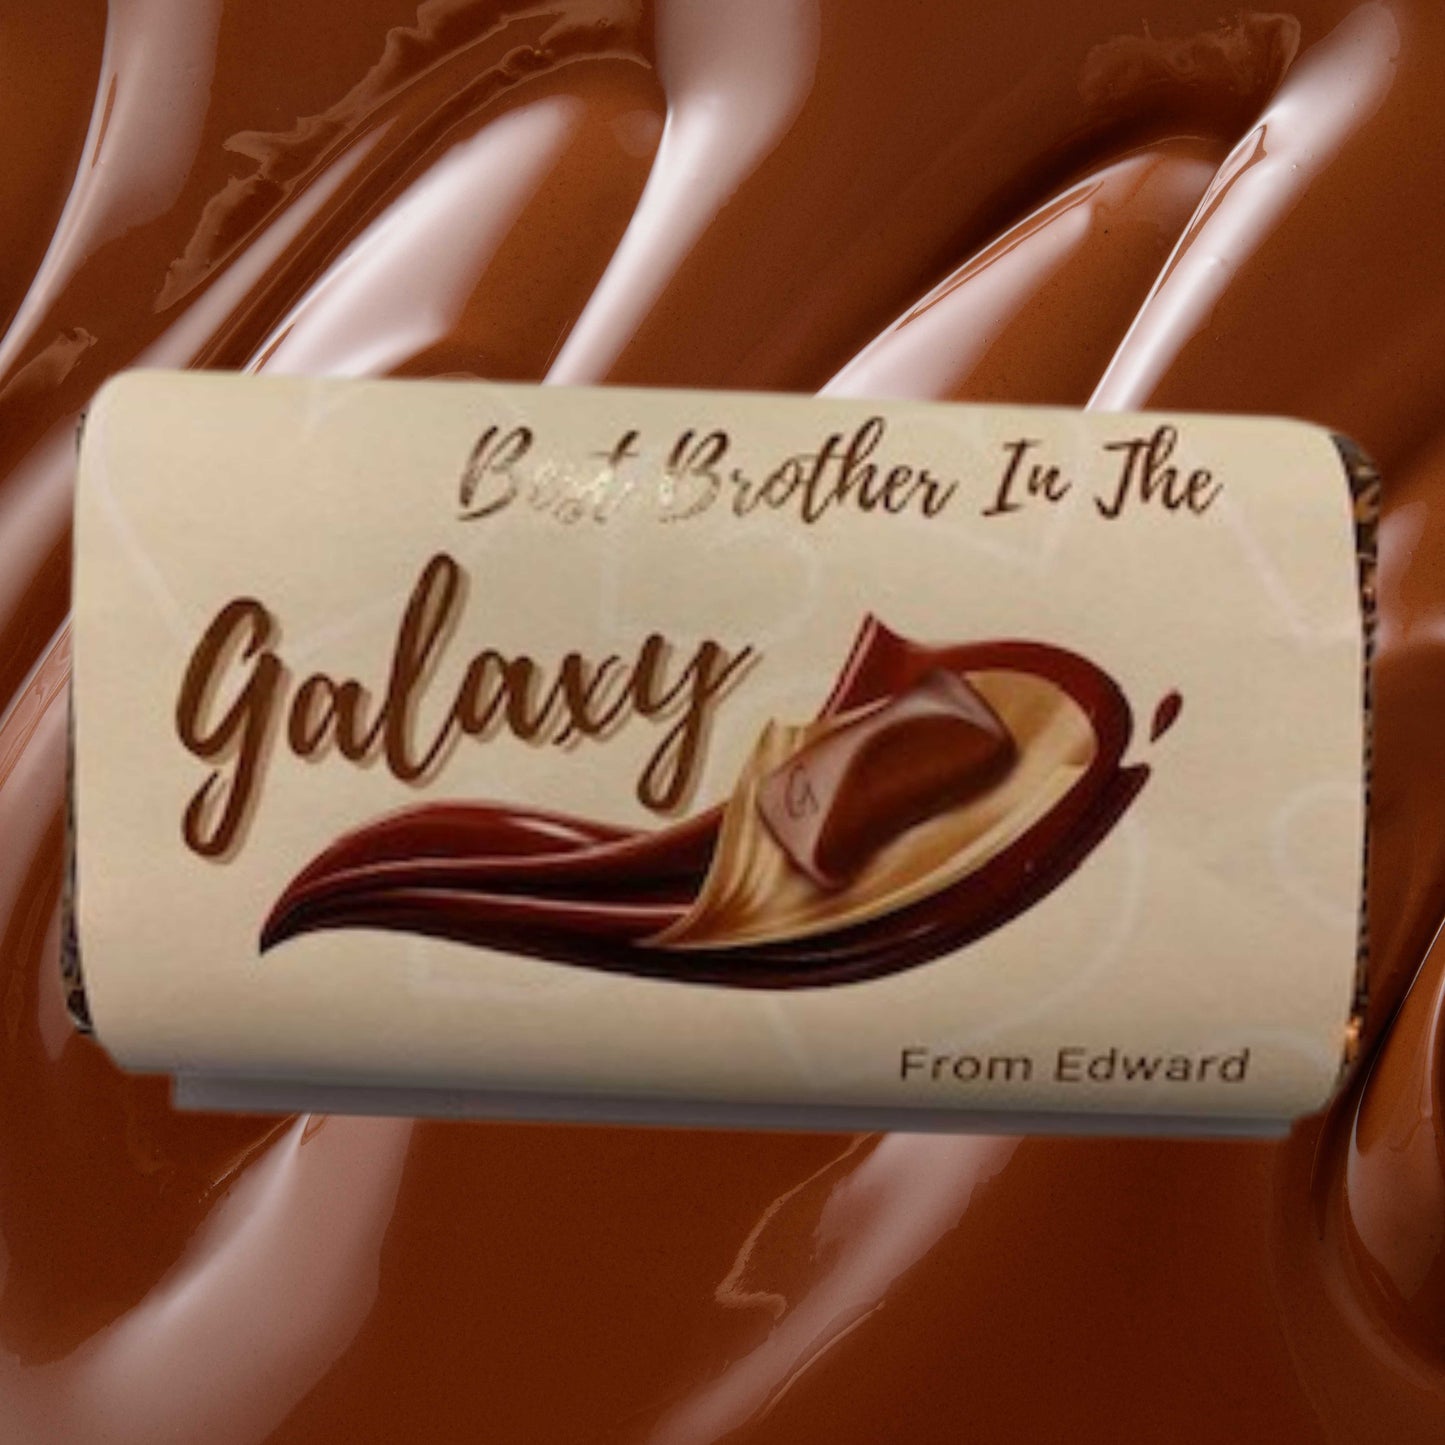 Best Brother in the Galaxy wrapped bar of Galaxy chocolate personalised